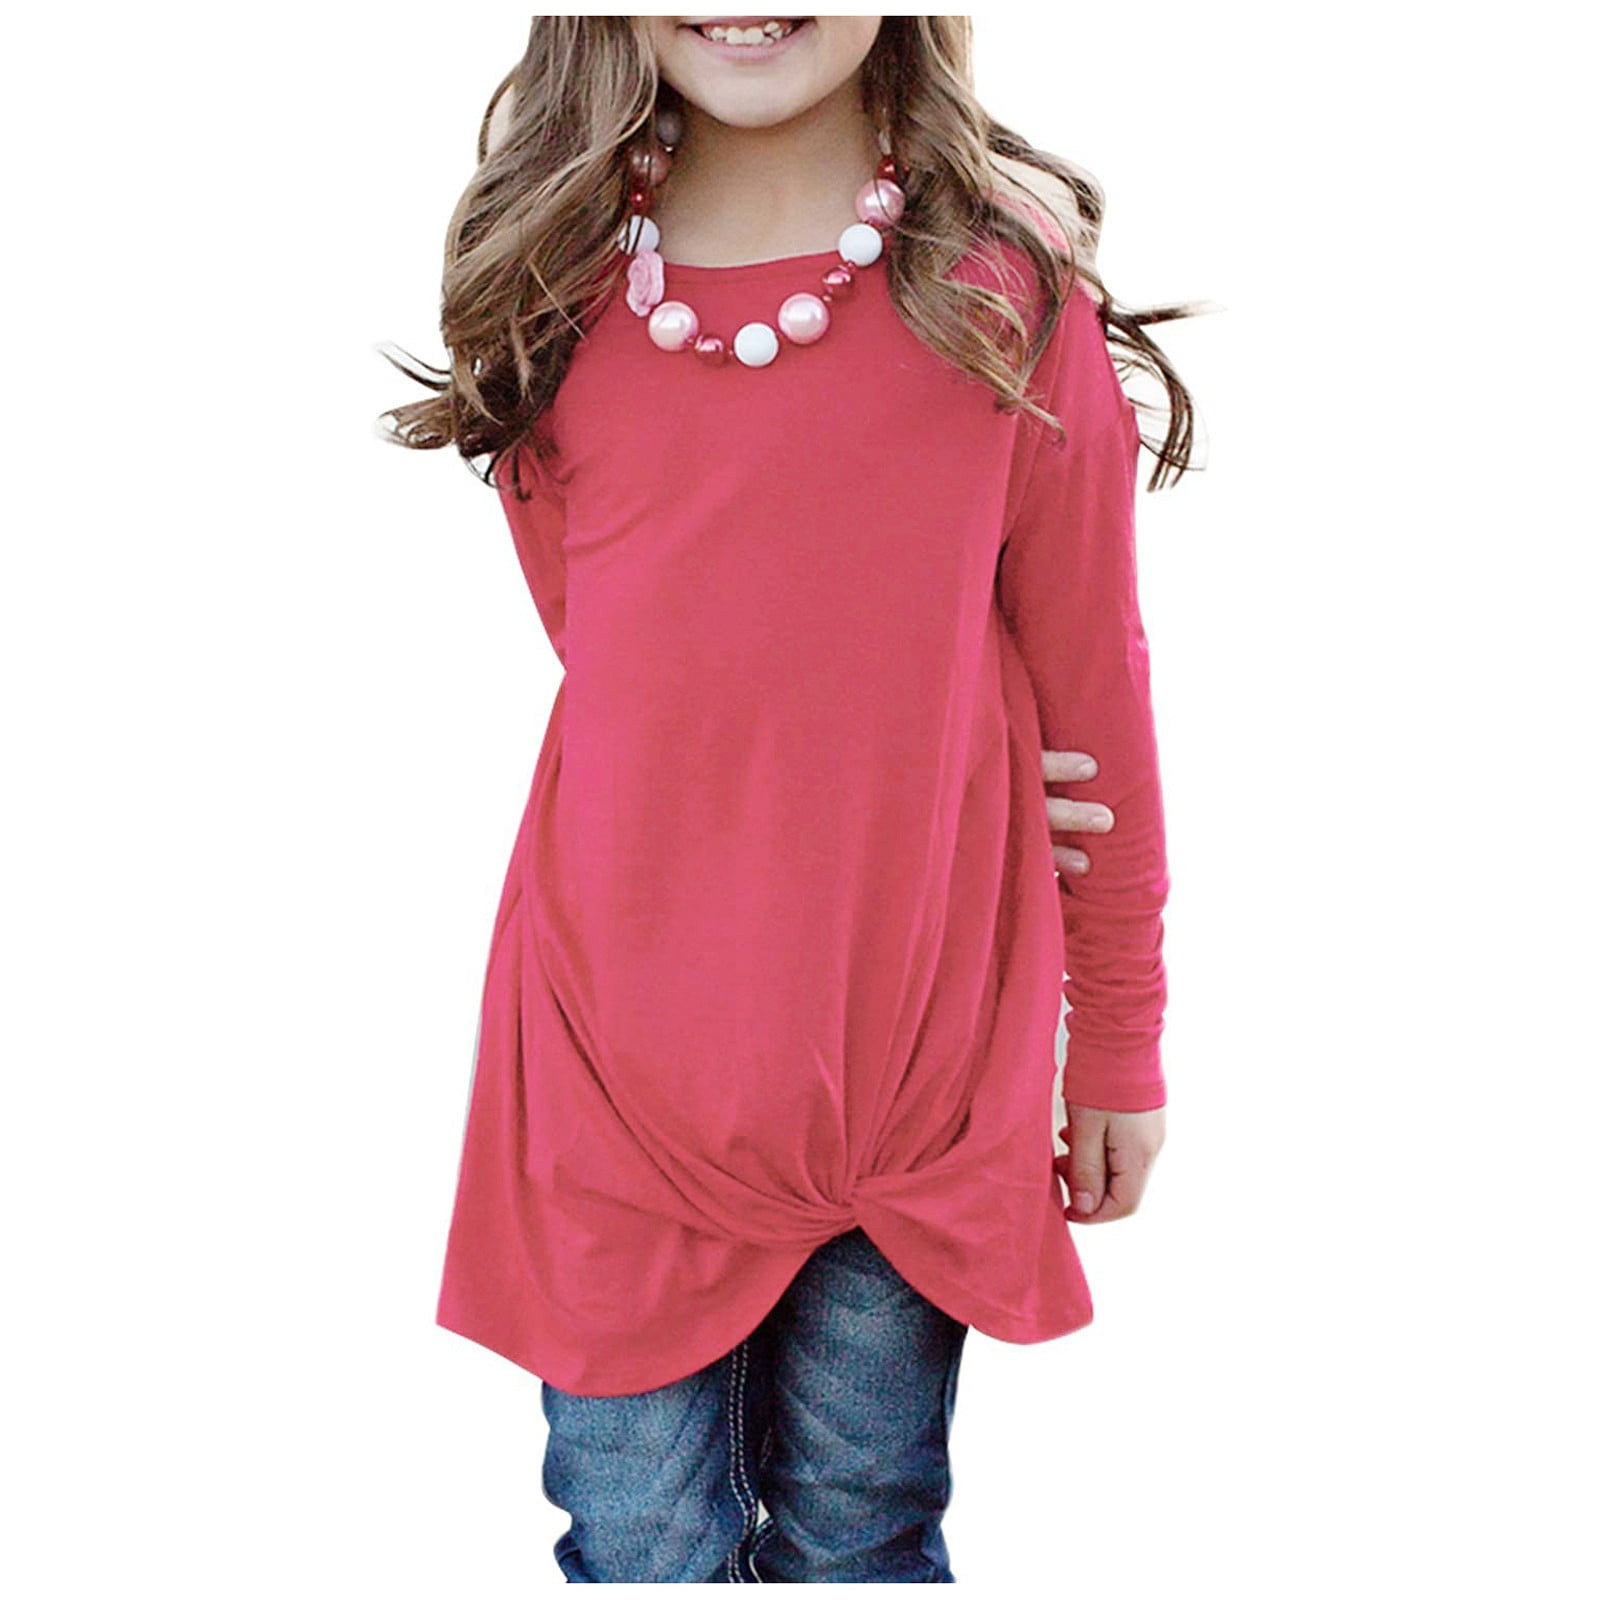 LISfsa Teen Girls Fall Clothes Tunic Tops Long Sleeve Knot Front Shirts for 4-13 Years Loose Soft Casual Blouse T-Shirt Tee 